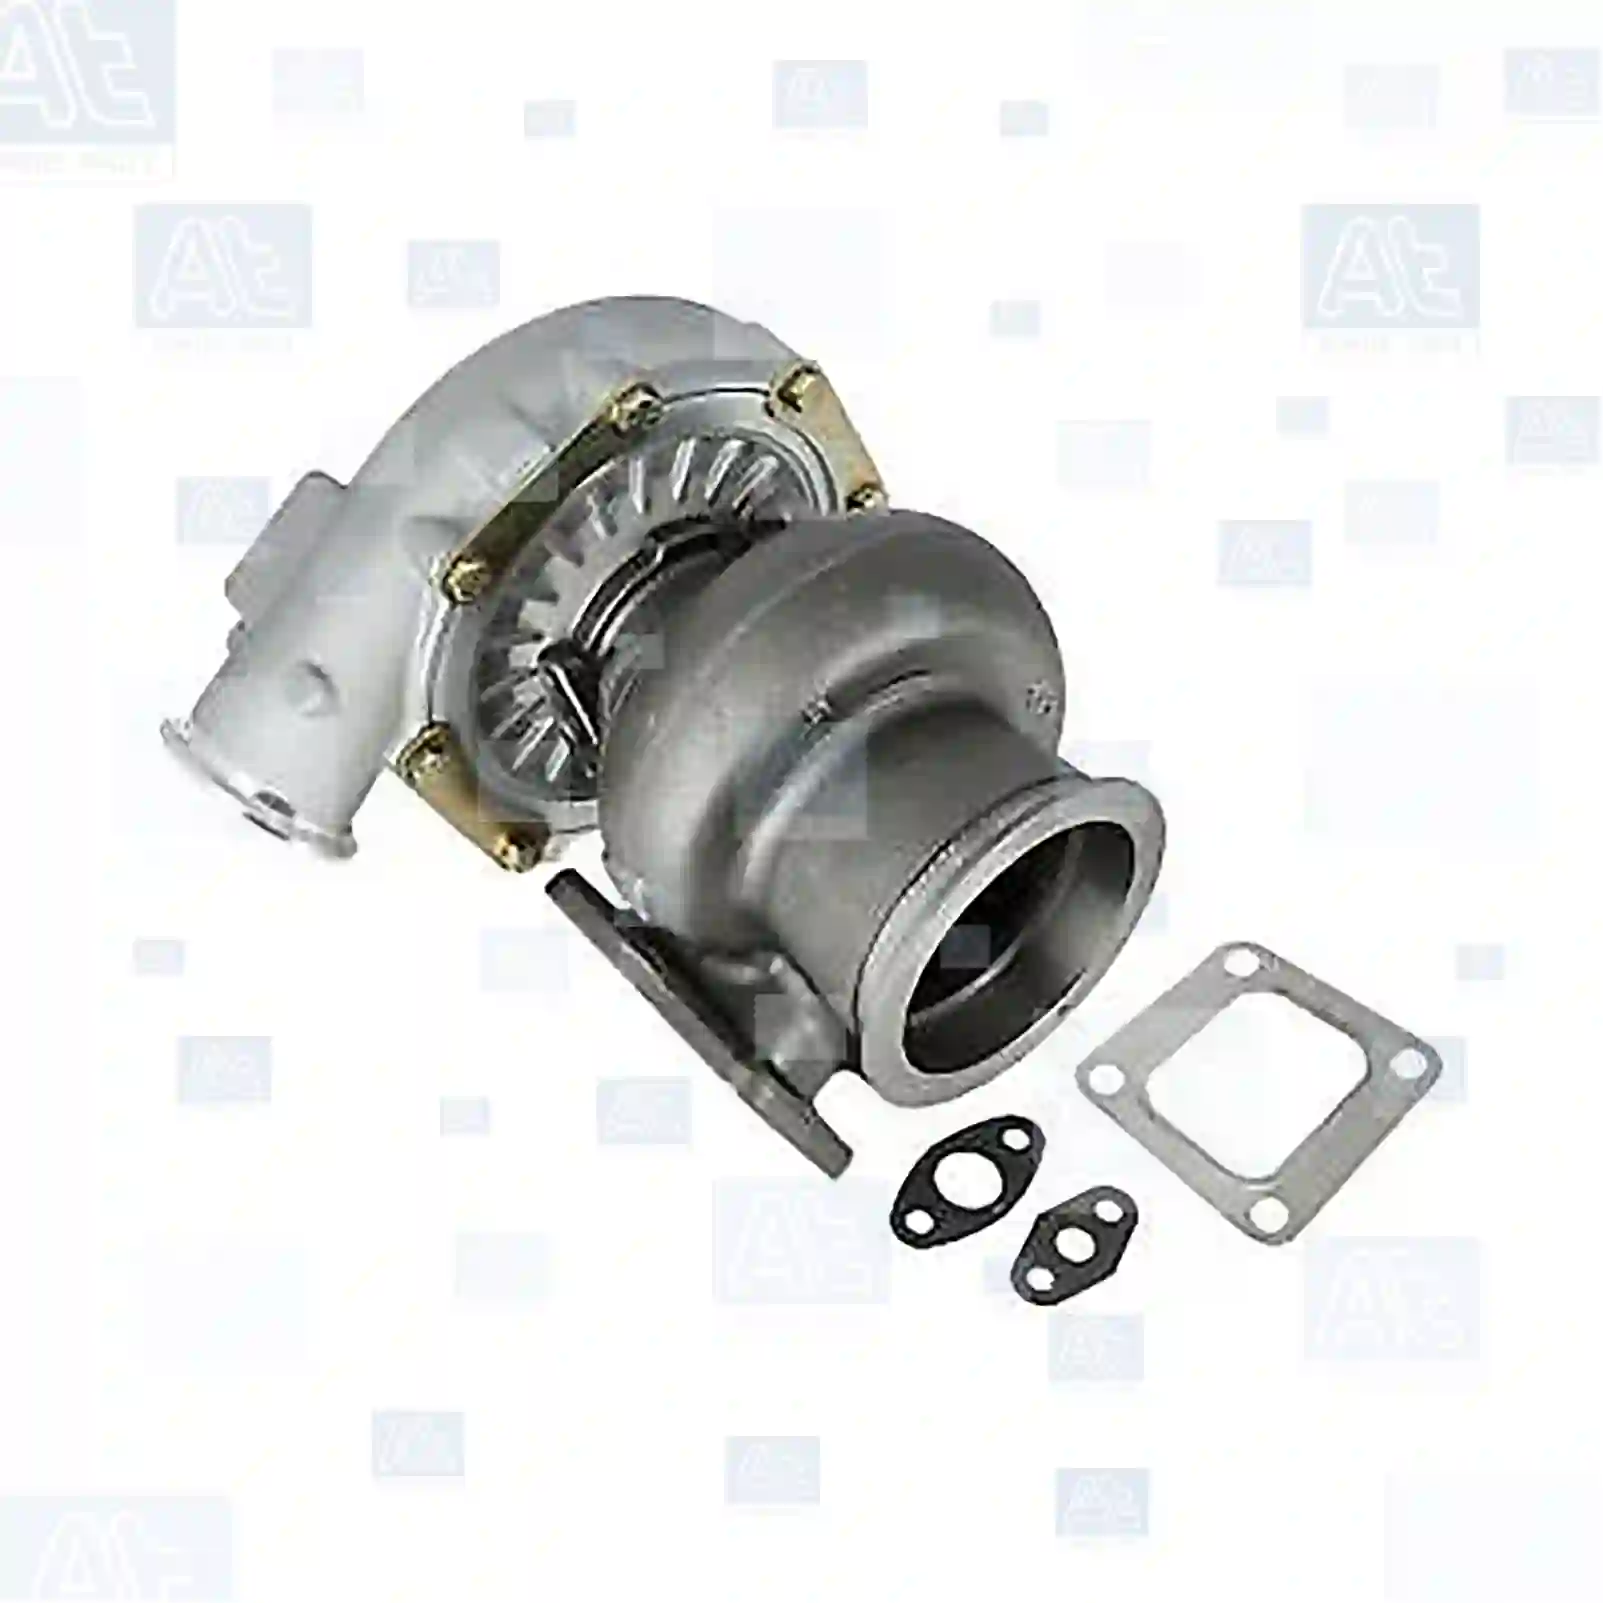 Turbocharger, with gasket kit, at no 77700403, oem no: 10571491, 10571532, 10571693, 10571695, 10571713, 10571715, 10572774, 10572776, 1372846, 1380095, 1380097, 1382085, 1400412, 1400413, 1405660, 1405666, 1405667, 1423021, 1430805, 1430806, 1501547, 1501641, 1501642, 1501646, 1501647, 1524872, 1524873, 1524876, 1524877, 1571489, 1571491, 1571531, 1571532, 1571693, 1571695, 1571715, 1776559, 1776560, 1776561, 1776562, 501641, 501646, 524872, 524876, 571489, 571491, 571531, 571532, 571693, 571695, 571715, ZG02208-0008 At Spare Part | Engine, Accelerator Pedal, Camshaft, Connecting Rod, Crankcase, Crankshaft, Cylinder Head, Engine Suspension Mountings, Exhaust Manifold, Exhaust Gas Recirculation, Filter Kits, Flywheel Housing, General Overhaul Kits, Engine, Intake Manifold, Oil Cleaner, Oil Cooler, Oil Filter, Oil Pump, Oil Sump, Piston & Liner, Sensor & Switch, Timing Case, Turbocharger, Cooling System, Belt Tensioner, Coolant Filter, Coolant Pipe, Corrosion Prevention Agent, Drive, Expansion Tank, Fan, Intercooler, Monitors & Gauges, Radiator, Thermostat, V-Belt / Timing belt, Water Pump, Fuel System, Electronical Injector Unit, Feed Pump, Fuel Filter, cpl., Fuel Gauge Sender,  Fuel Line, Fuel Pump, Fuel Tank, Injection Line Kit, Injection Pump, Exhaust System, Clutch & Pedal, Gearbox, Propeller Shaft, Axles, Brake System, Hubs & Wheels, Suspension, Leaf Spring, Universal Parts / Accessories, Steering, Electrical System, Cabin Turbocharger, with gasket kit, at no 77700403, oem no: 10571491, 10571532, 10571693, 10571695, 10571713, 10571715, 10572774, 10572776, 1372846, 1380095, 1380097, 1382085, 1400412, 1400413, 1405660, 1405666, 1405667, 1423021, 1430805, 1430806, 1501547, 1501641, 1501642, 1501646, 1501647, 1524872, 1524873, 1524876, 1524877, 1571489, 1571491, 1571531, 1571532, 1571693, 1571695, 1571715, 1776559, 1776560, 1776561, 1776562, 501641, 501646, 524872, 524876, 571489, 571491, 571531, 571532, 571693, 571695, 571715, ZG02208-0008 At Spare Part | Engine, Accelerator Pedal, Camshaft, Connecting Rod, Crankcase, Crankshaft, Cylinder Head, Engine Suspension Mountings, Exhaust Manifold, Exhaust Gas Recirculation, Filter Kits, Flywheel Housing, General Overhaul Kits, Engine, Intake Manifold, Oil Cleaner, Oil Cooler, Oil Filter, Oil Pump, Oil Sump, Piston & Liner, Sensor & Switch, Timing Case, Turbocharger, Cooling System, Belt Tensioner, Coolant Filter, Coolant Pipe, Corrosion Prevention Agent, Drive, Expansion Tank, Fan, Intercooler, Monitors & Gauges, Radiator, Thermostat, V-Belt / Timing belt, Water Pump, Fuel System, Electronical Injector Unit, Feed Pump, Fuel Filter, cpl., Fuel Gauge Sender,  Fuel Line, Fuel Pump, Fuel Tank, Injection Line Kit, Injection Pump, Exhaust System, Clutch & Pedal, Gearbox, Propeller Shaft, Axles, Brake System, Hubs & Wheels, Suspension, Leaf Spring, Universal Parts / Accessories, Steering, Electrical System, Cabin